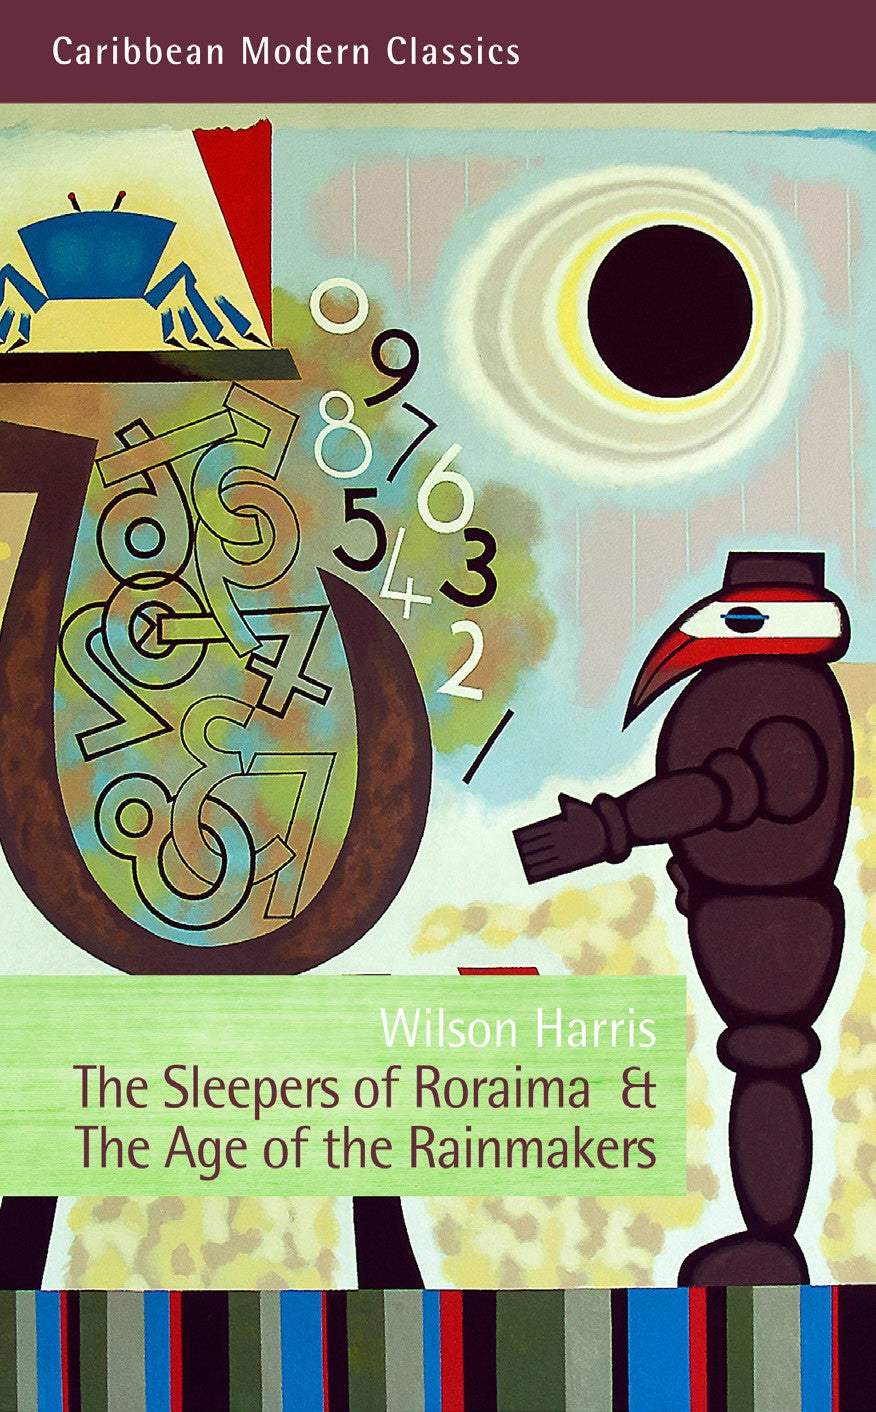 The Sleepers of Roraima & The Age of Rainmakers